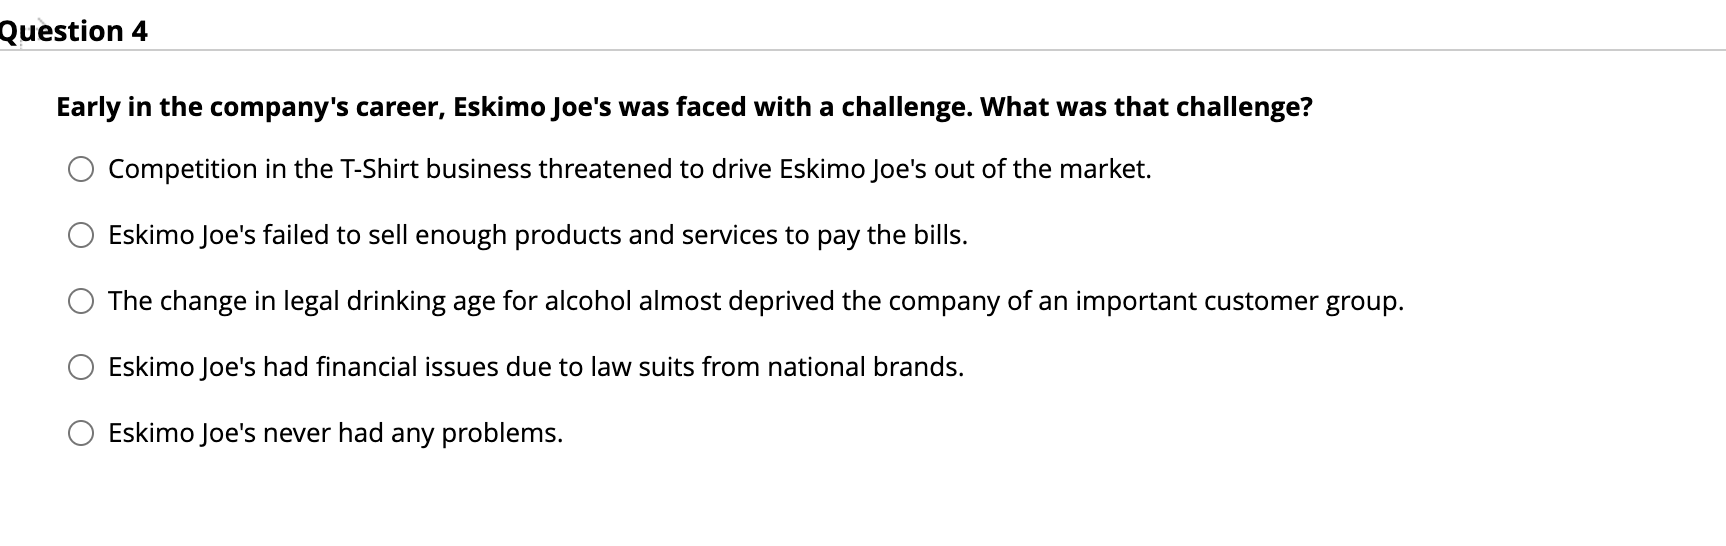 Early in the companys career, Eskimo Joes was faced with a challenge. What was that challenge?
Competition in the T-Shirt b